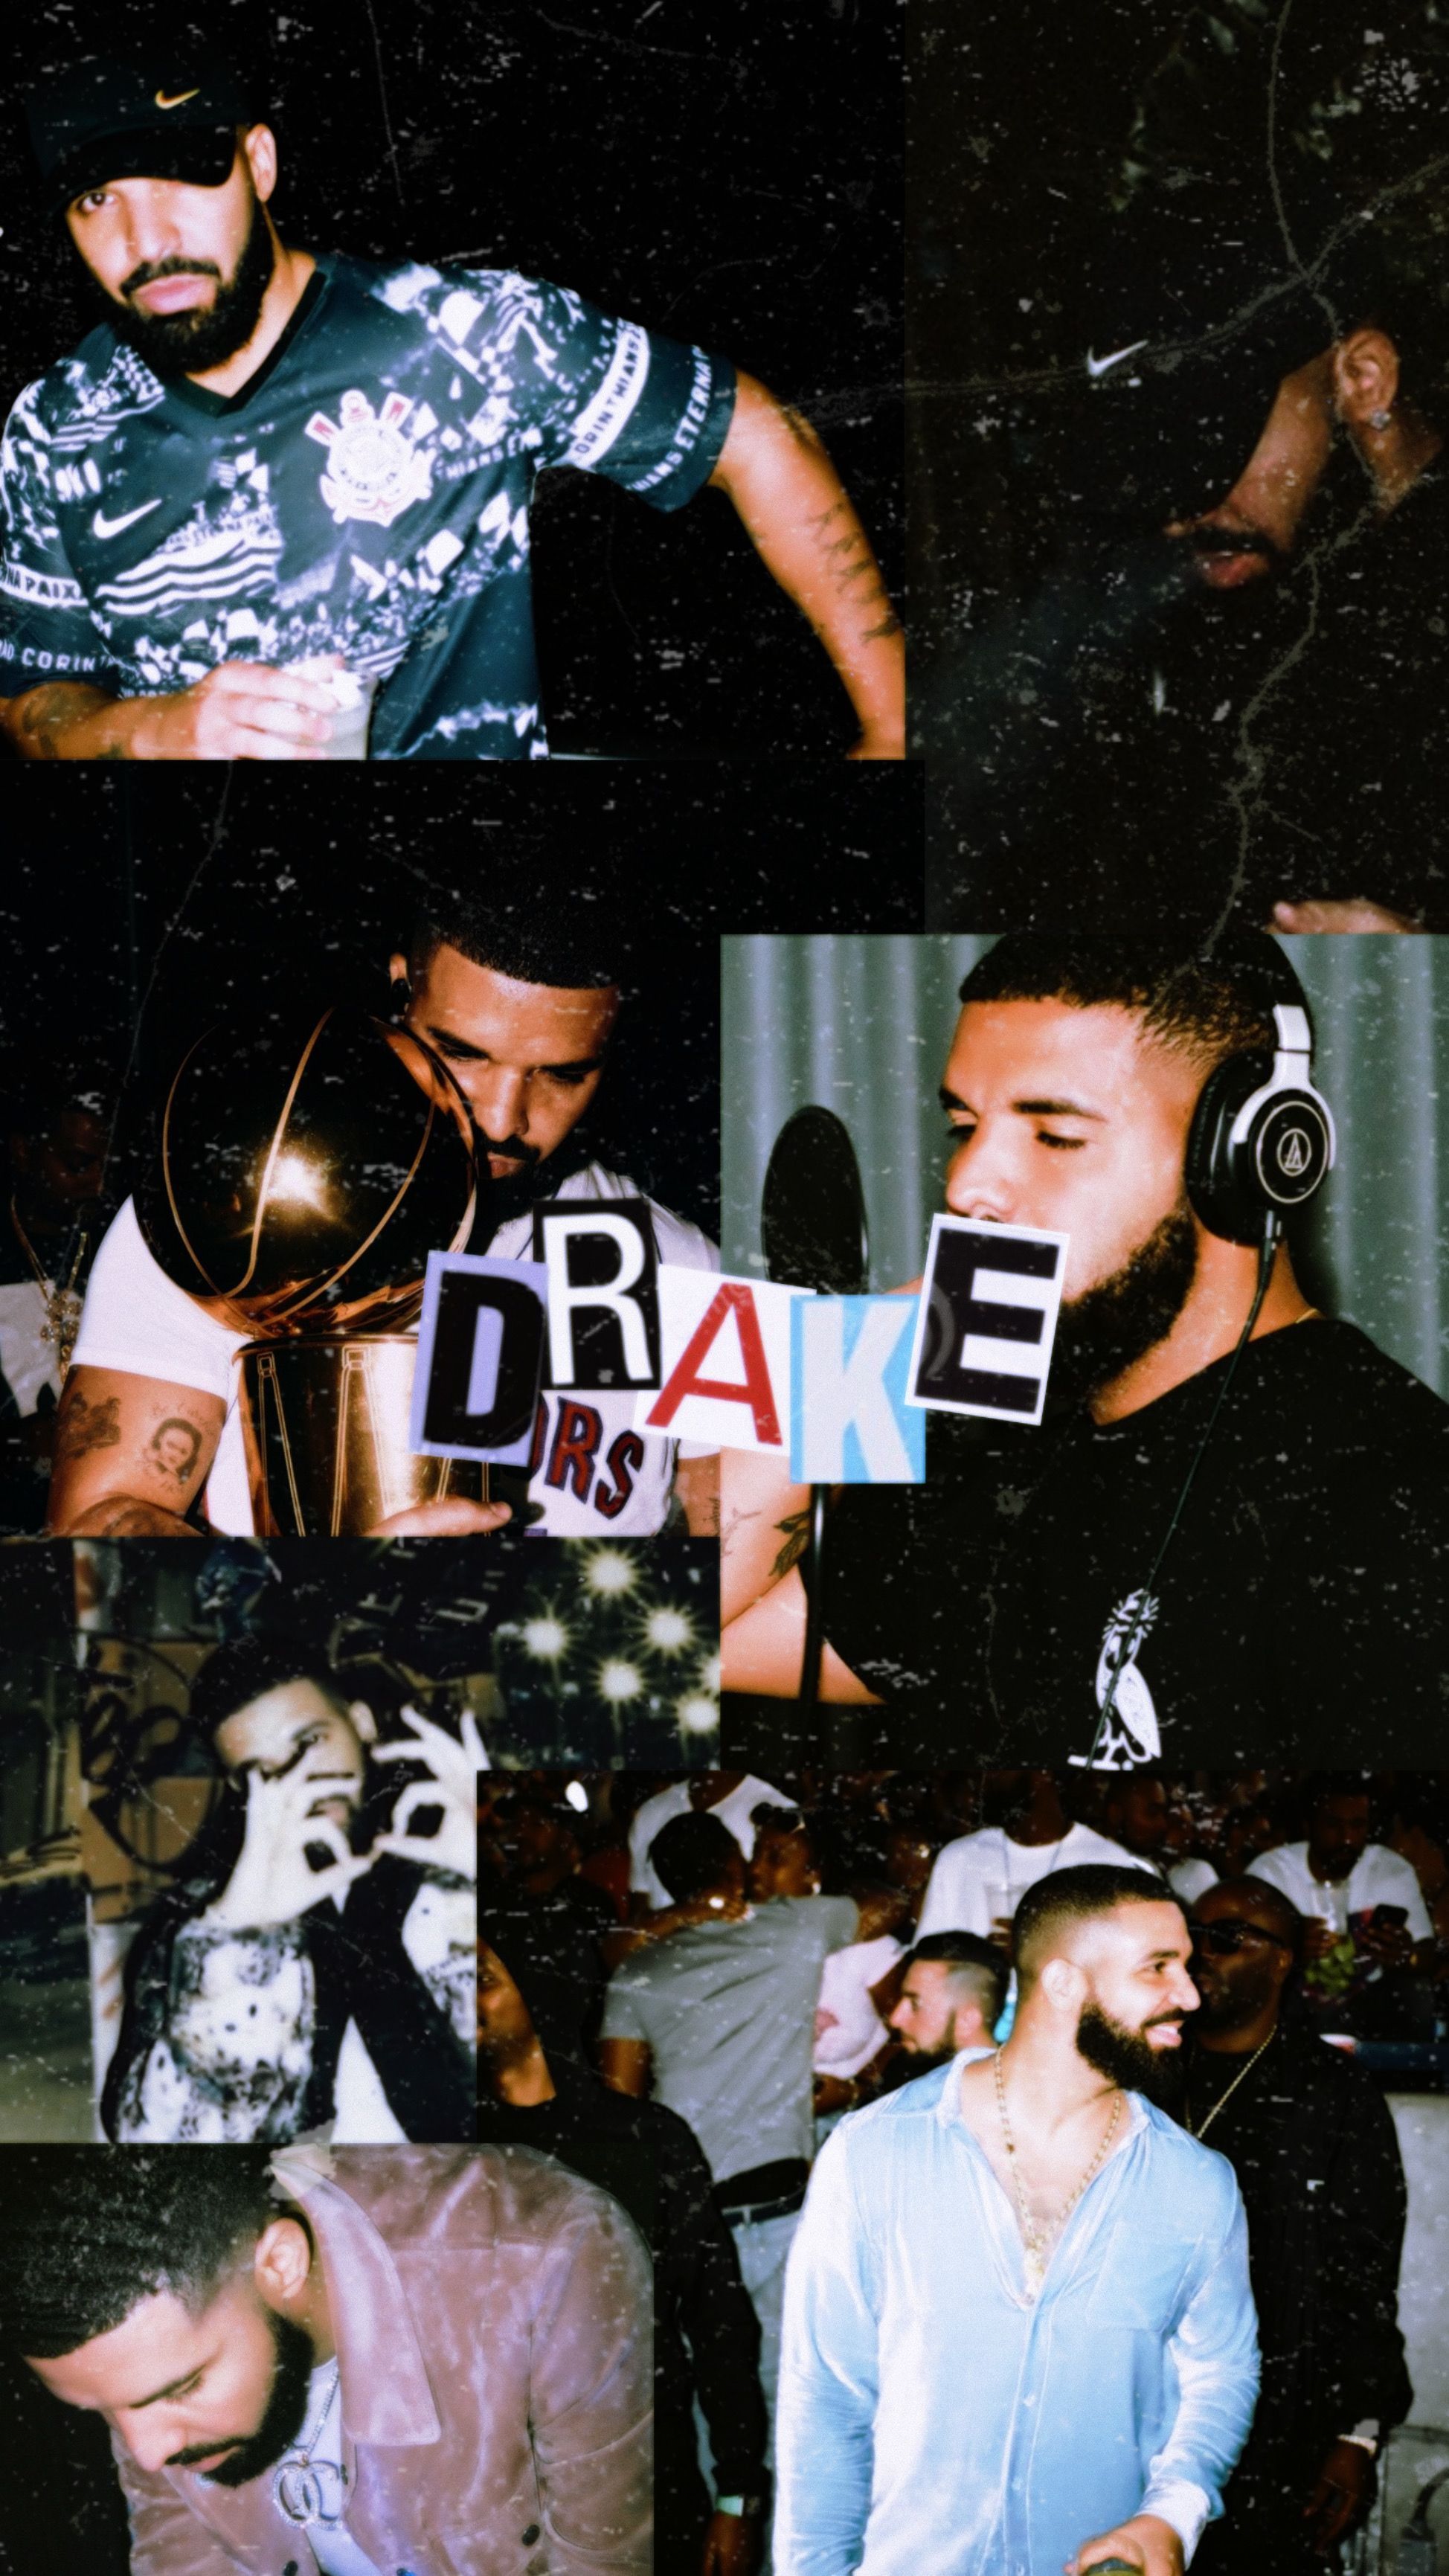 A collage of images of rapper Drake, some of which are photos of him holding a sign with his name on it. - Drake